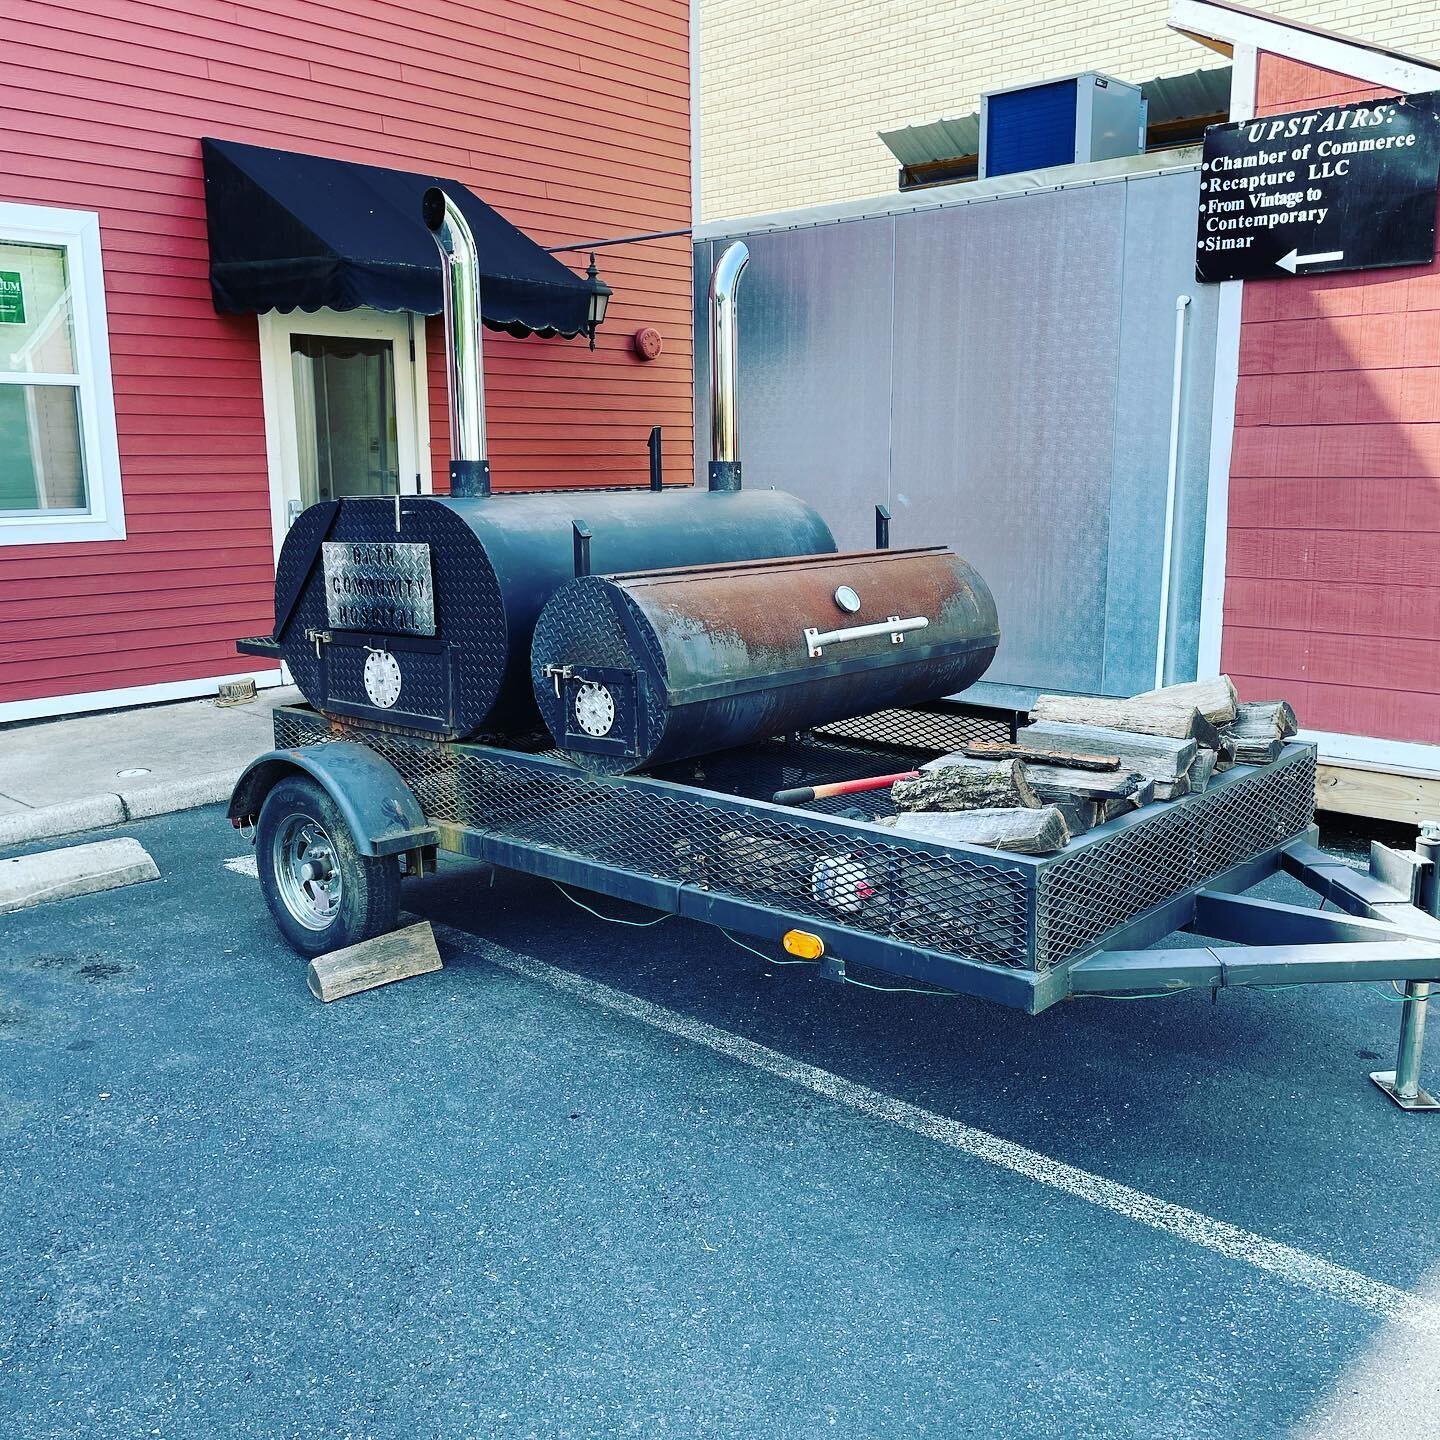 Gearing up for SUMMERFEST! The smoker has arrived! Thanks to @mike_terrypeery for hooking us up! You&rsquo;re not gonna wanna miss the party this Saturday, July 17th only at Bacova Beer!